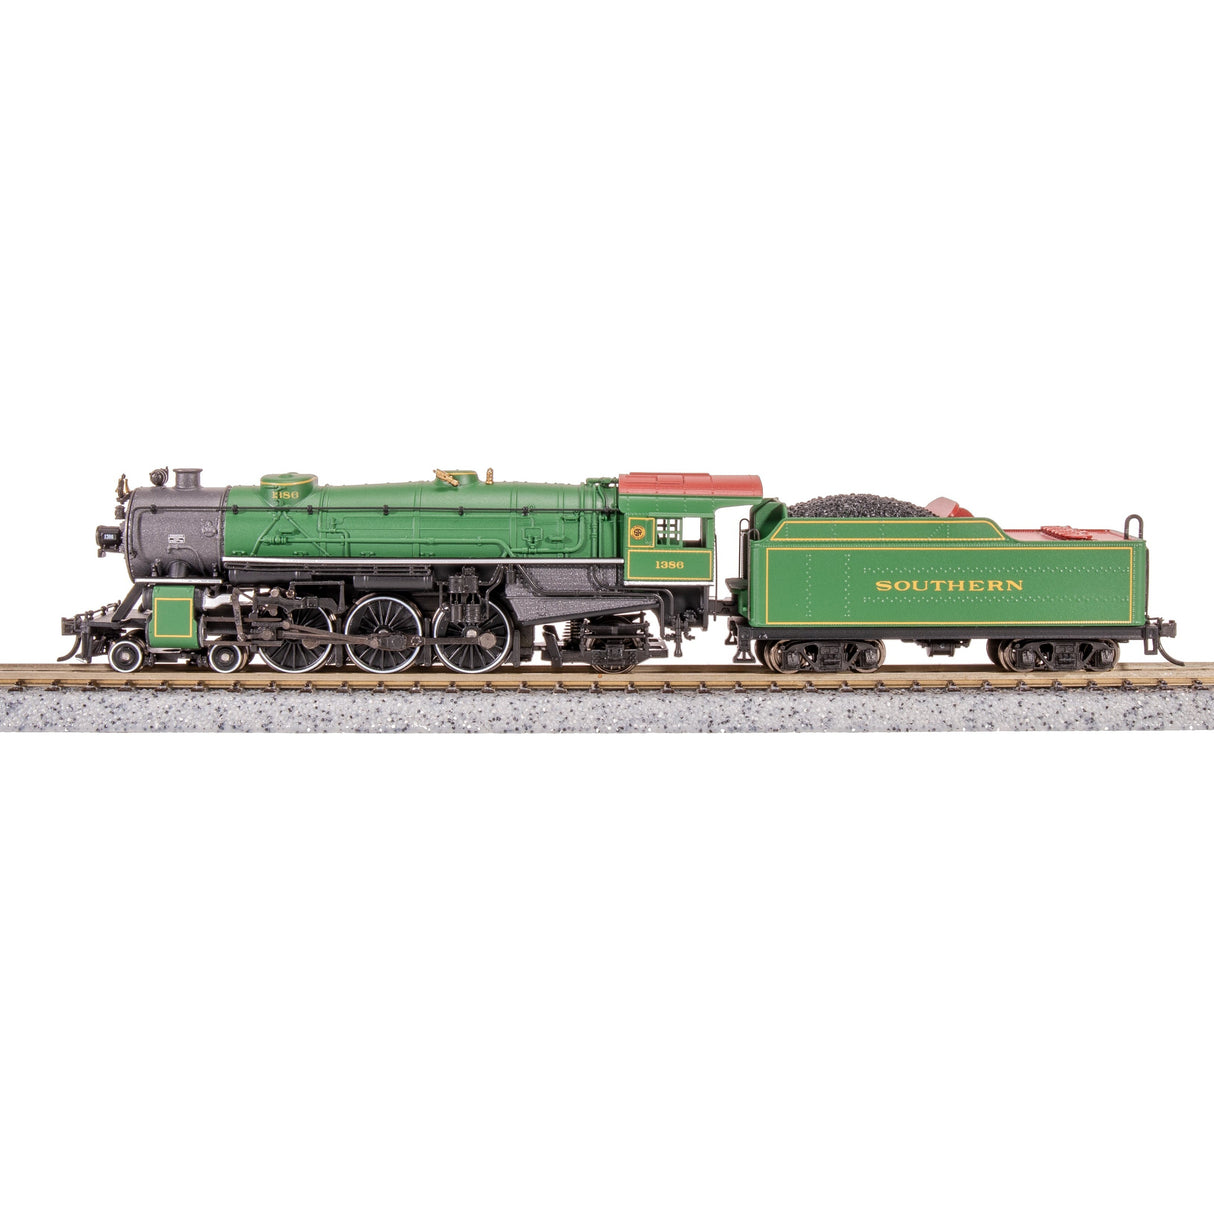 Broadway Limited N Scale USRA 4-6-2 Hvy.Pacific Steam Locomotive Southern #1386/grn DC/DCC